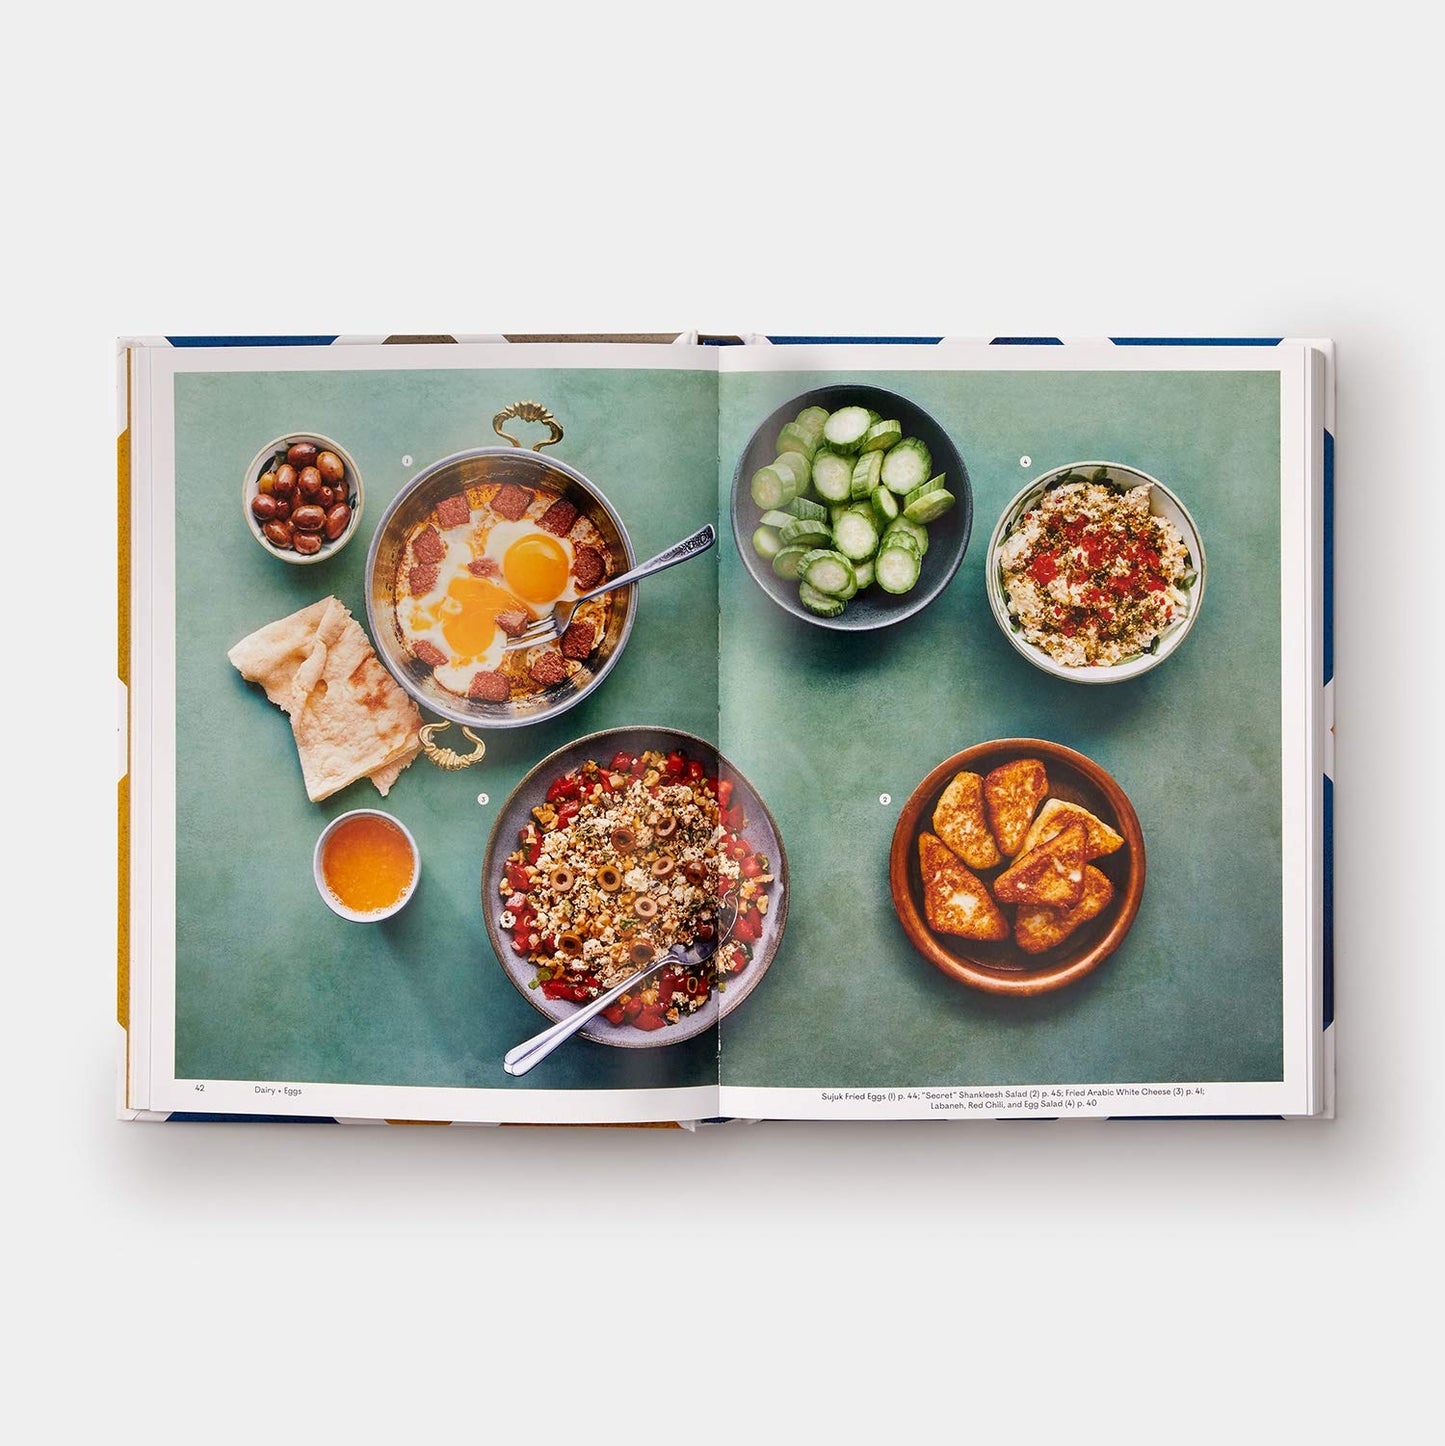 Arabesque Table: Contemporary Recipes from the Arab World